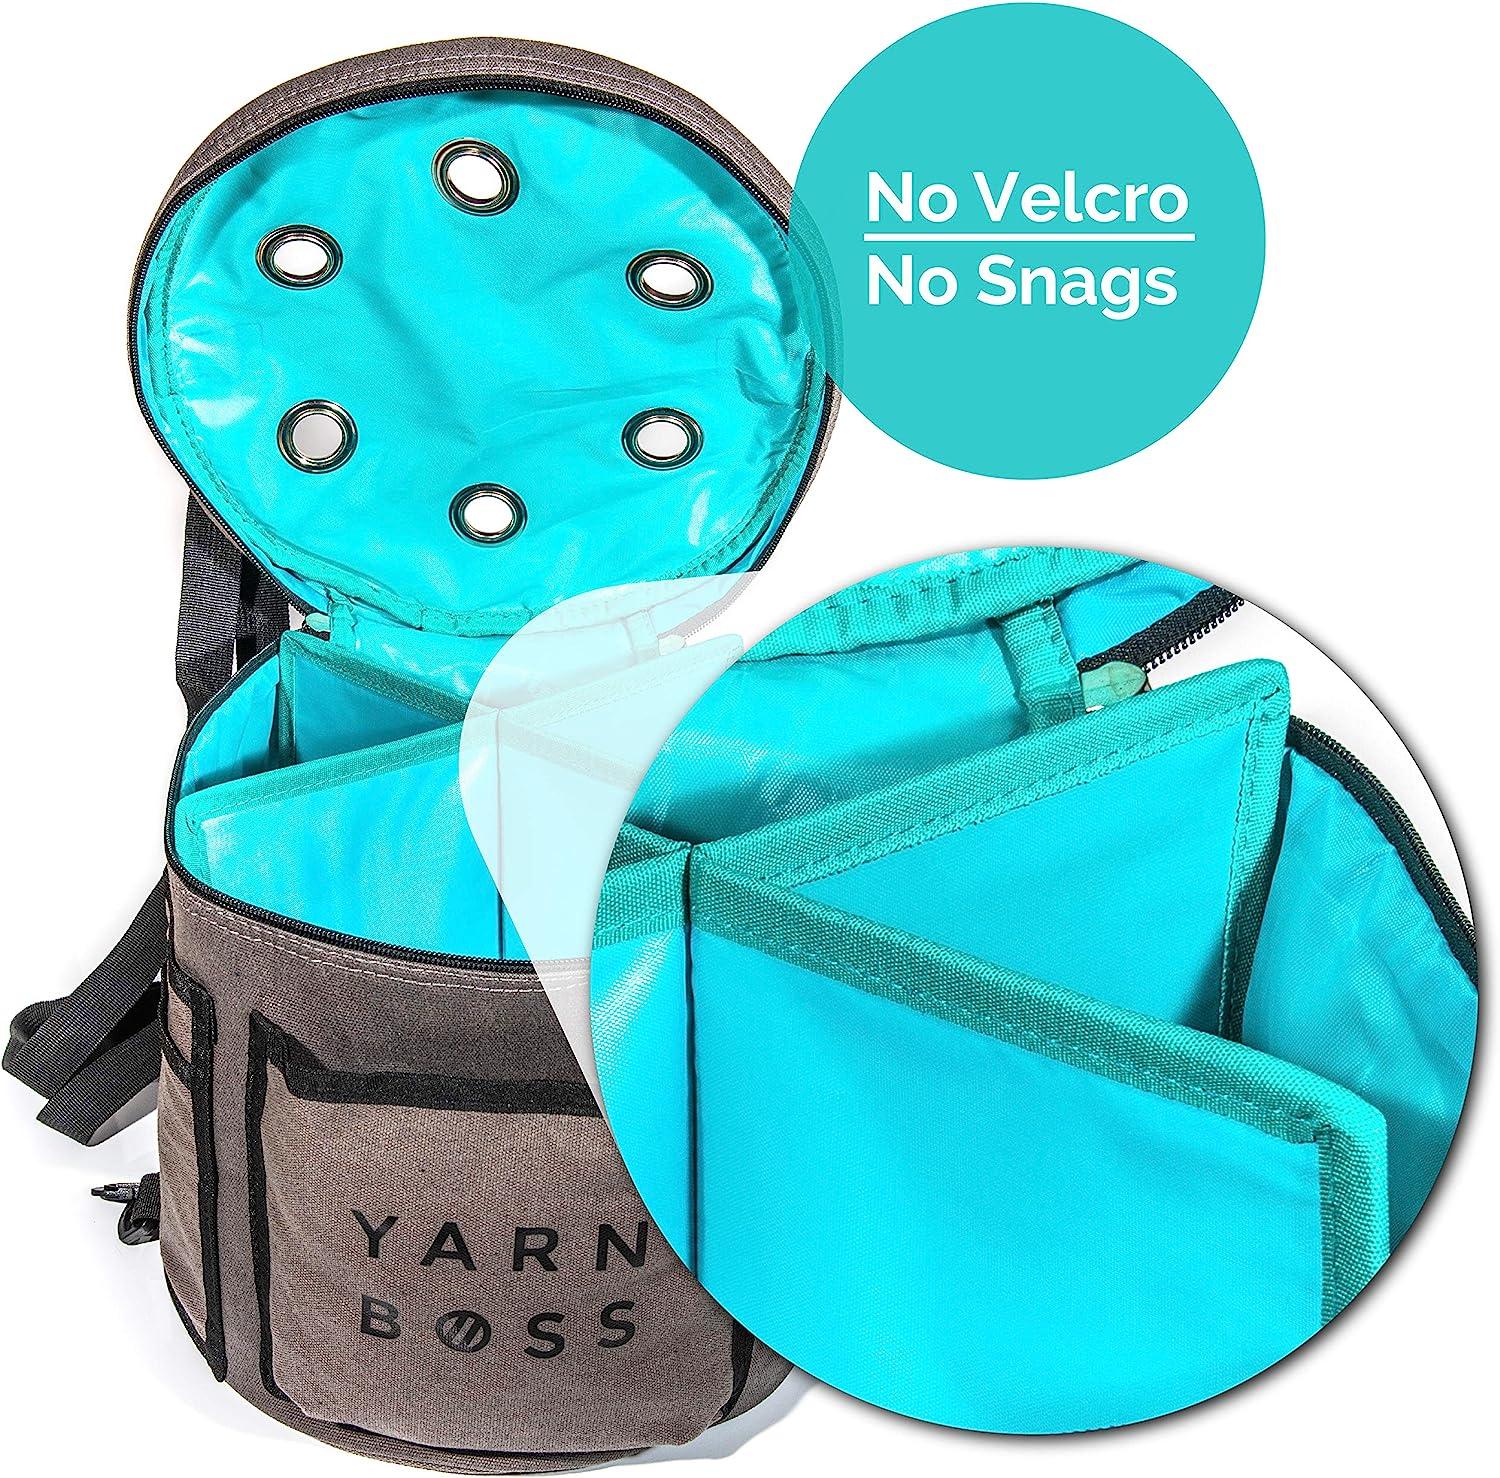 Yarn Boss Yarn Bag - Travel with Yarn & Knitting Supplies - Yarn Storage to  Organize Multiple Projects and Keep Your Yarn Safe and Clean - Knitting